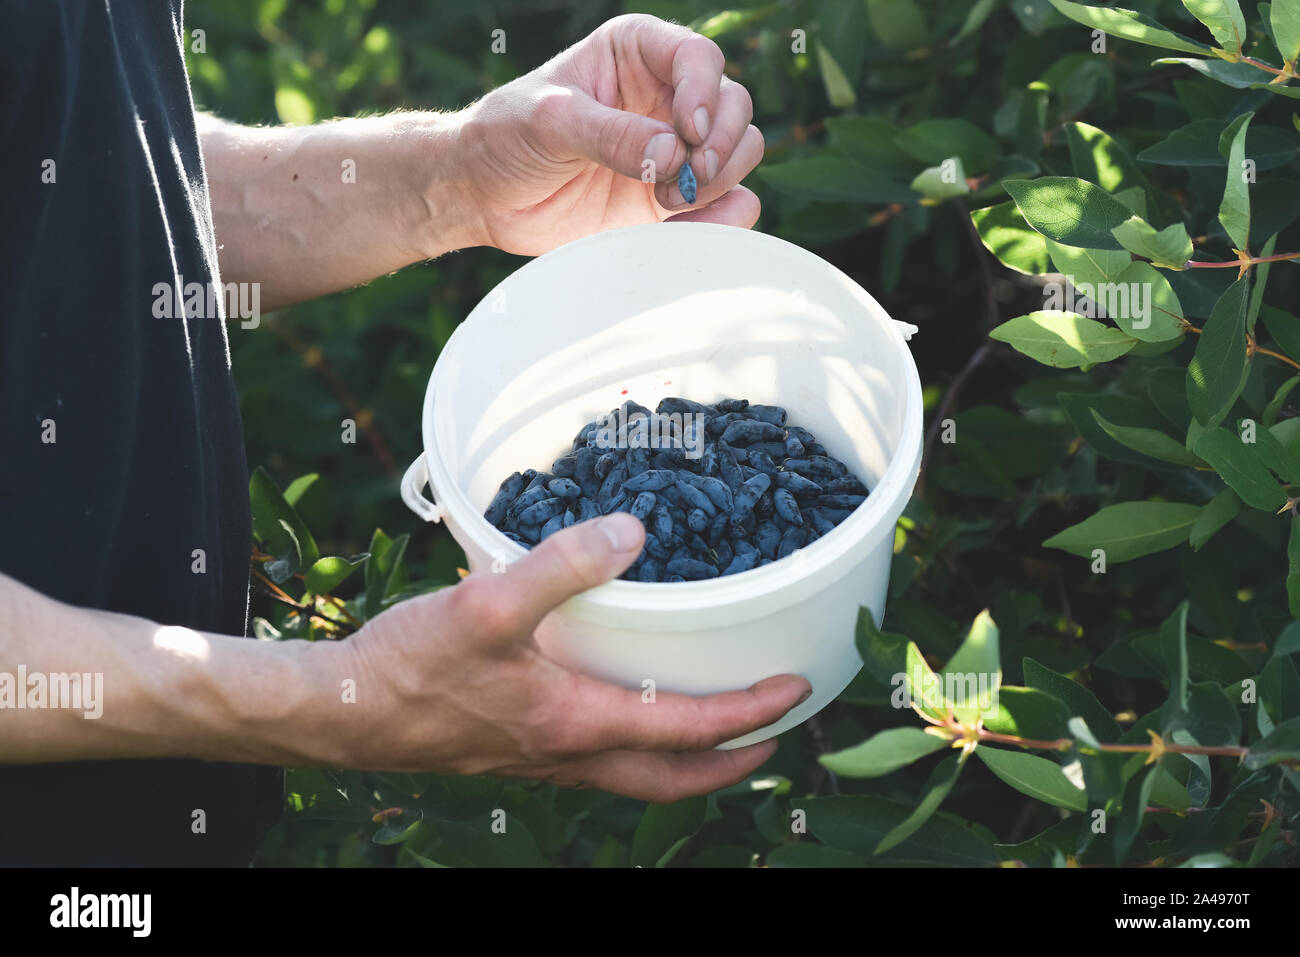 Farmer is harvesting honeysuckle berry from a tree. Stock Photo